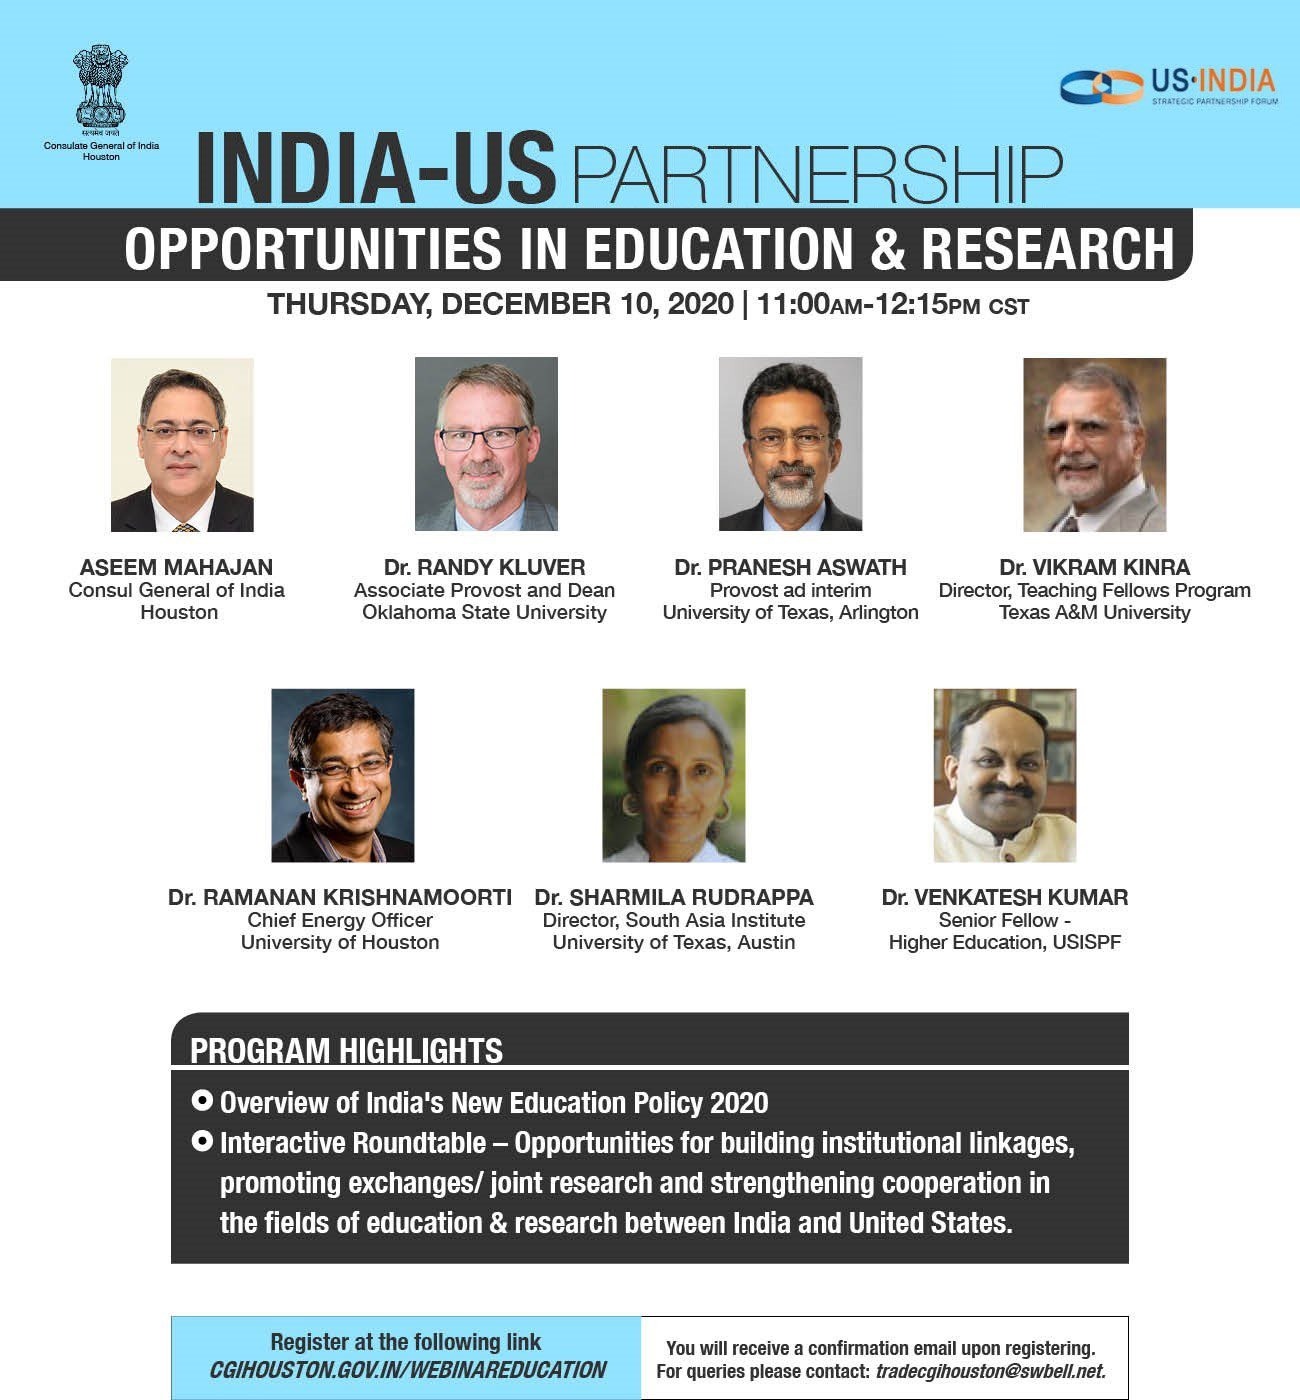 Consulate General of India organized a webinar "India-US Partnership: Opportunities in Education and Research’ along with other partners on December 10, 2020